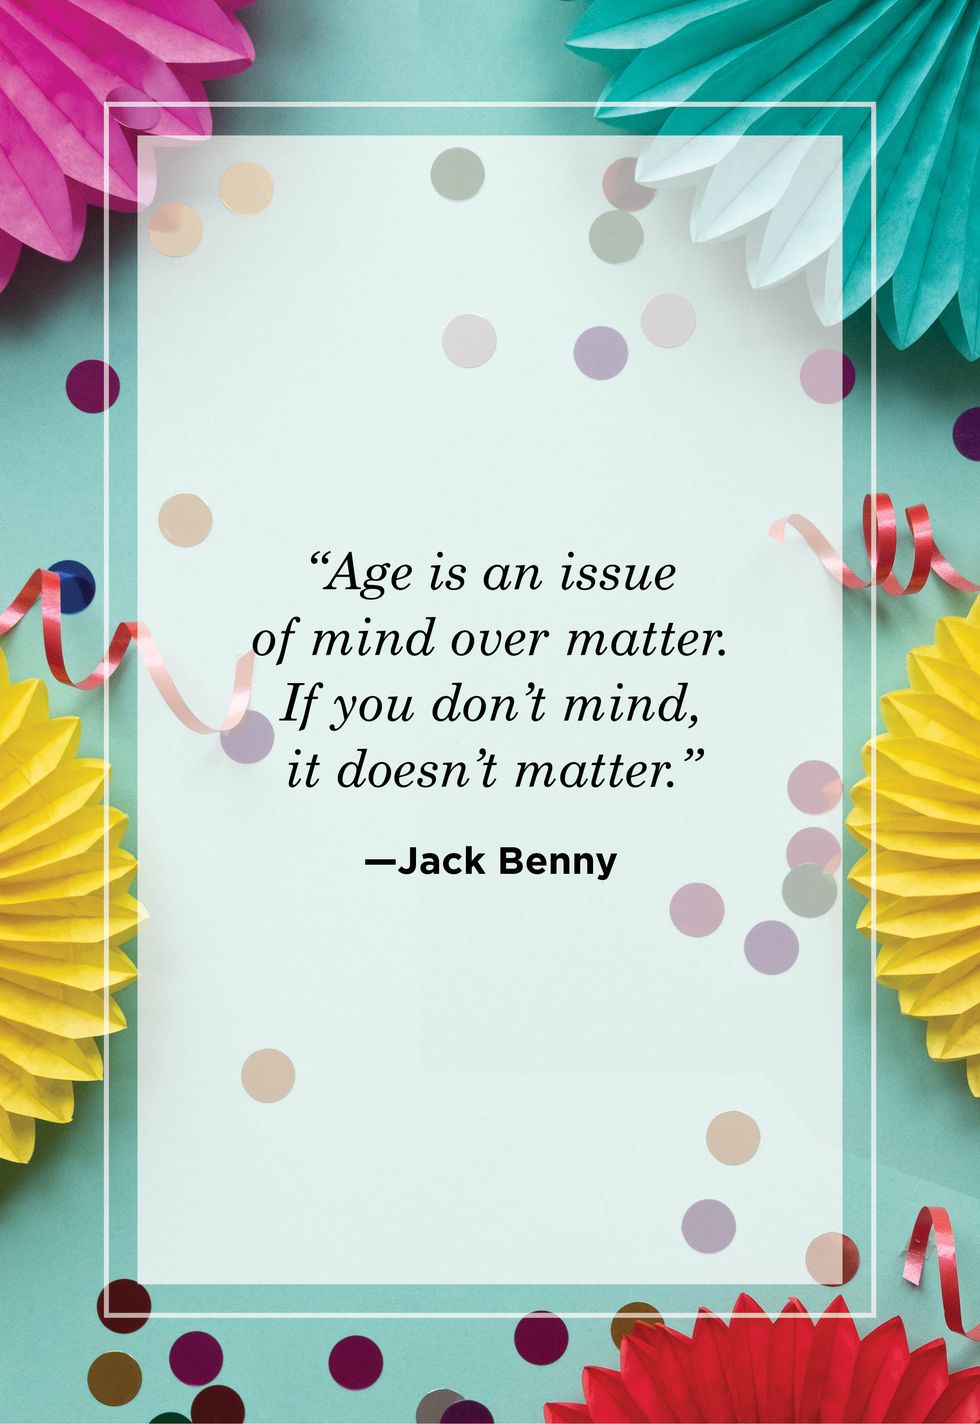 Age is an issue of mind, Happy Birthday Quote